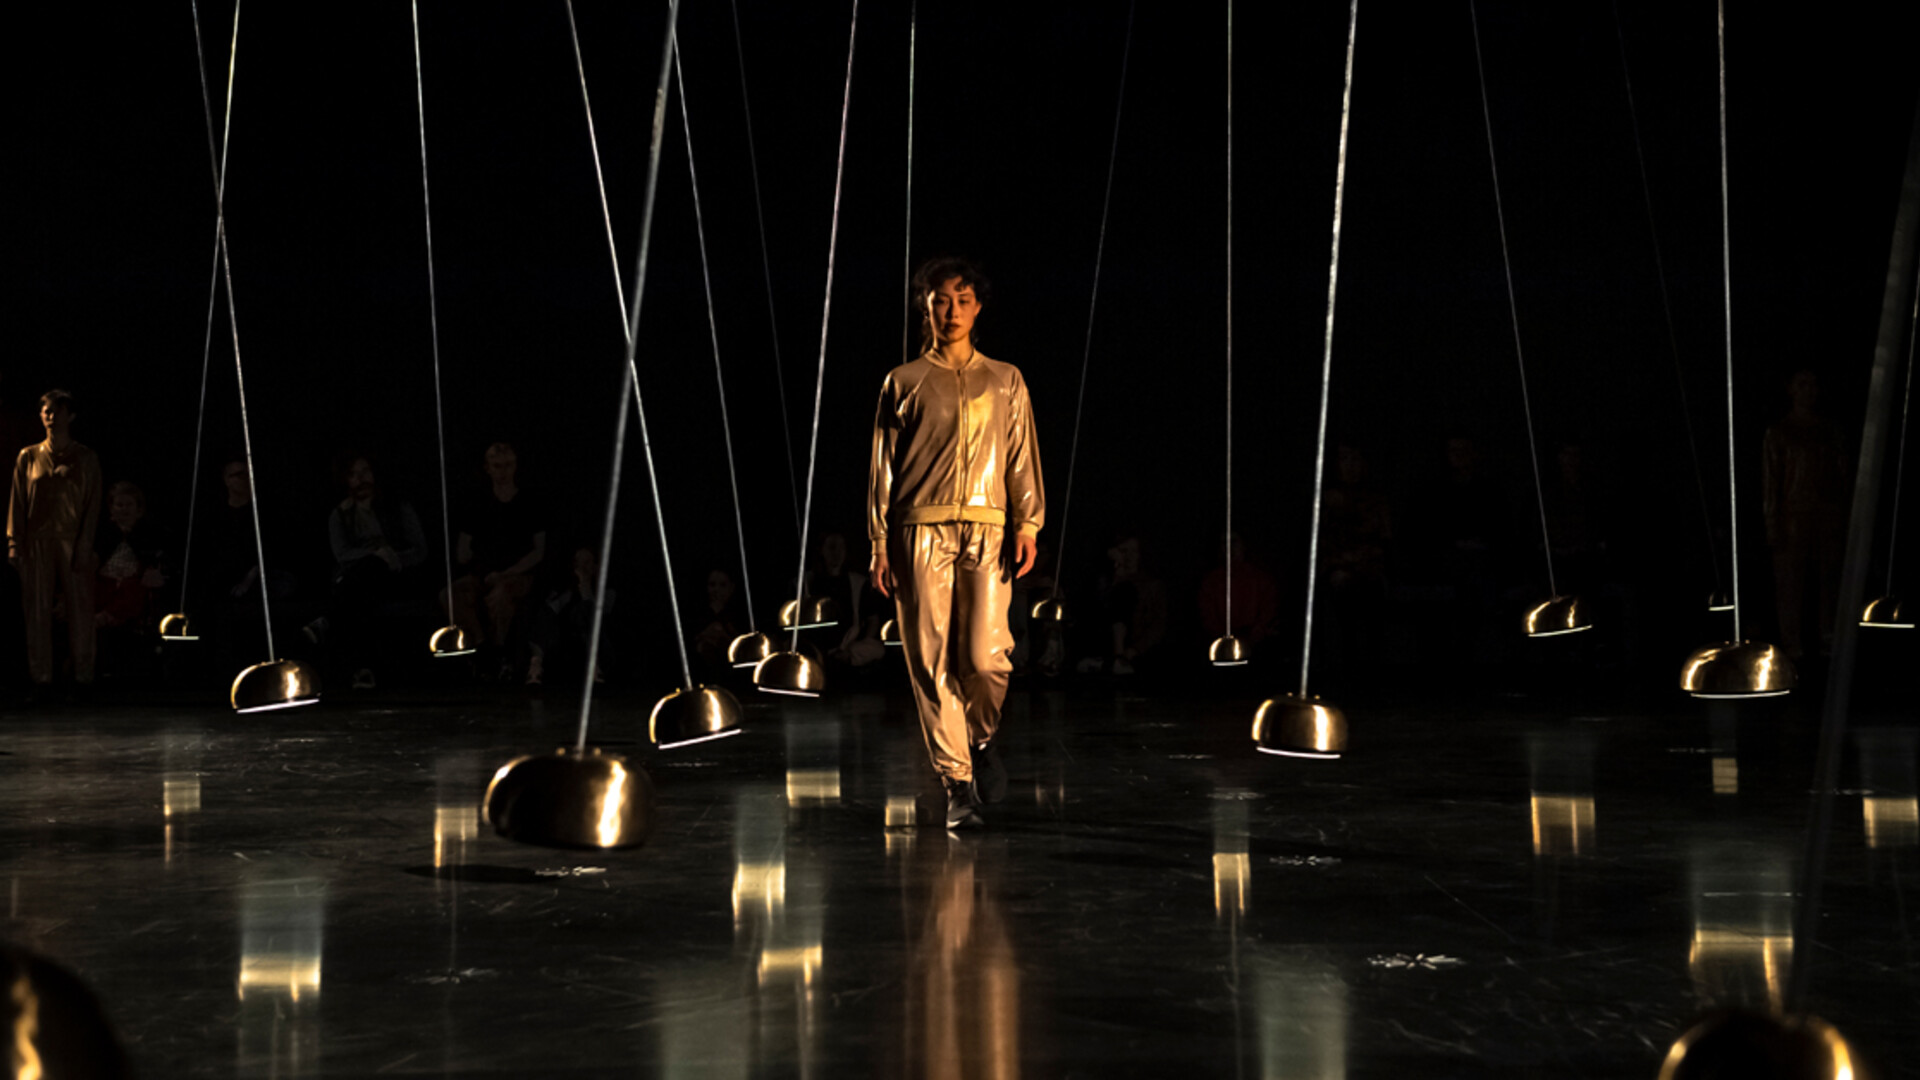 A dancer wearing a gold tracksuit walks toward the camera between suspended pendulums.